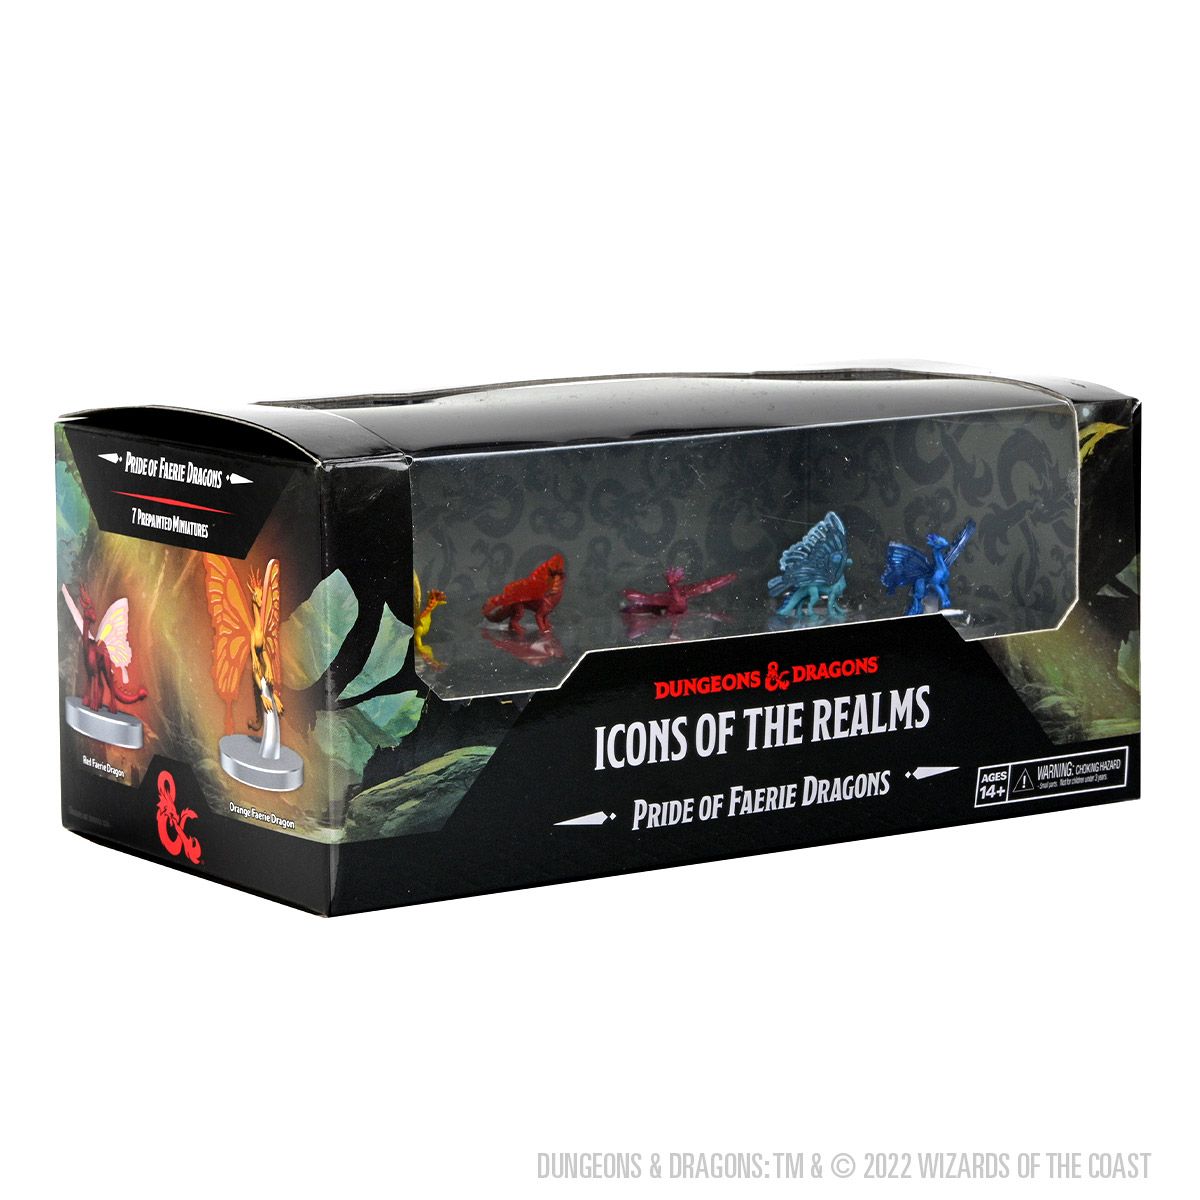 Dungeons & Dragons: Icons of the Realms Pride of Faerie Dragons - The Fourth Place